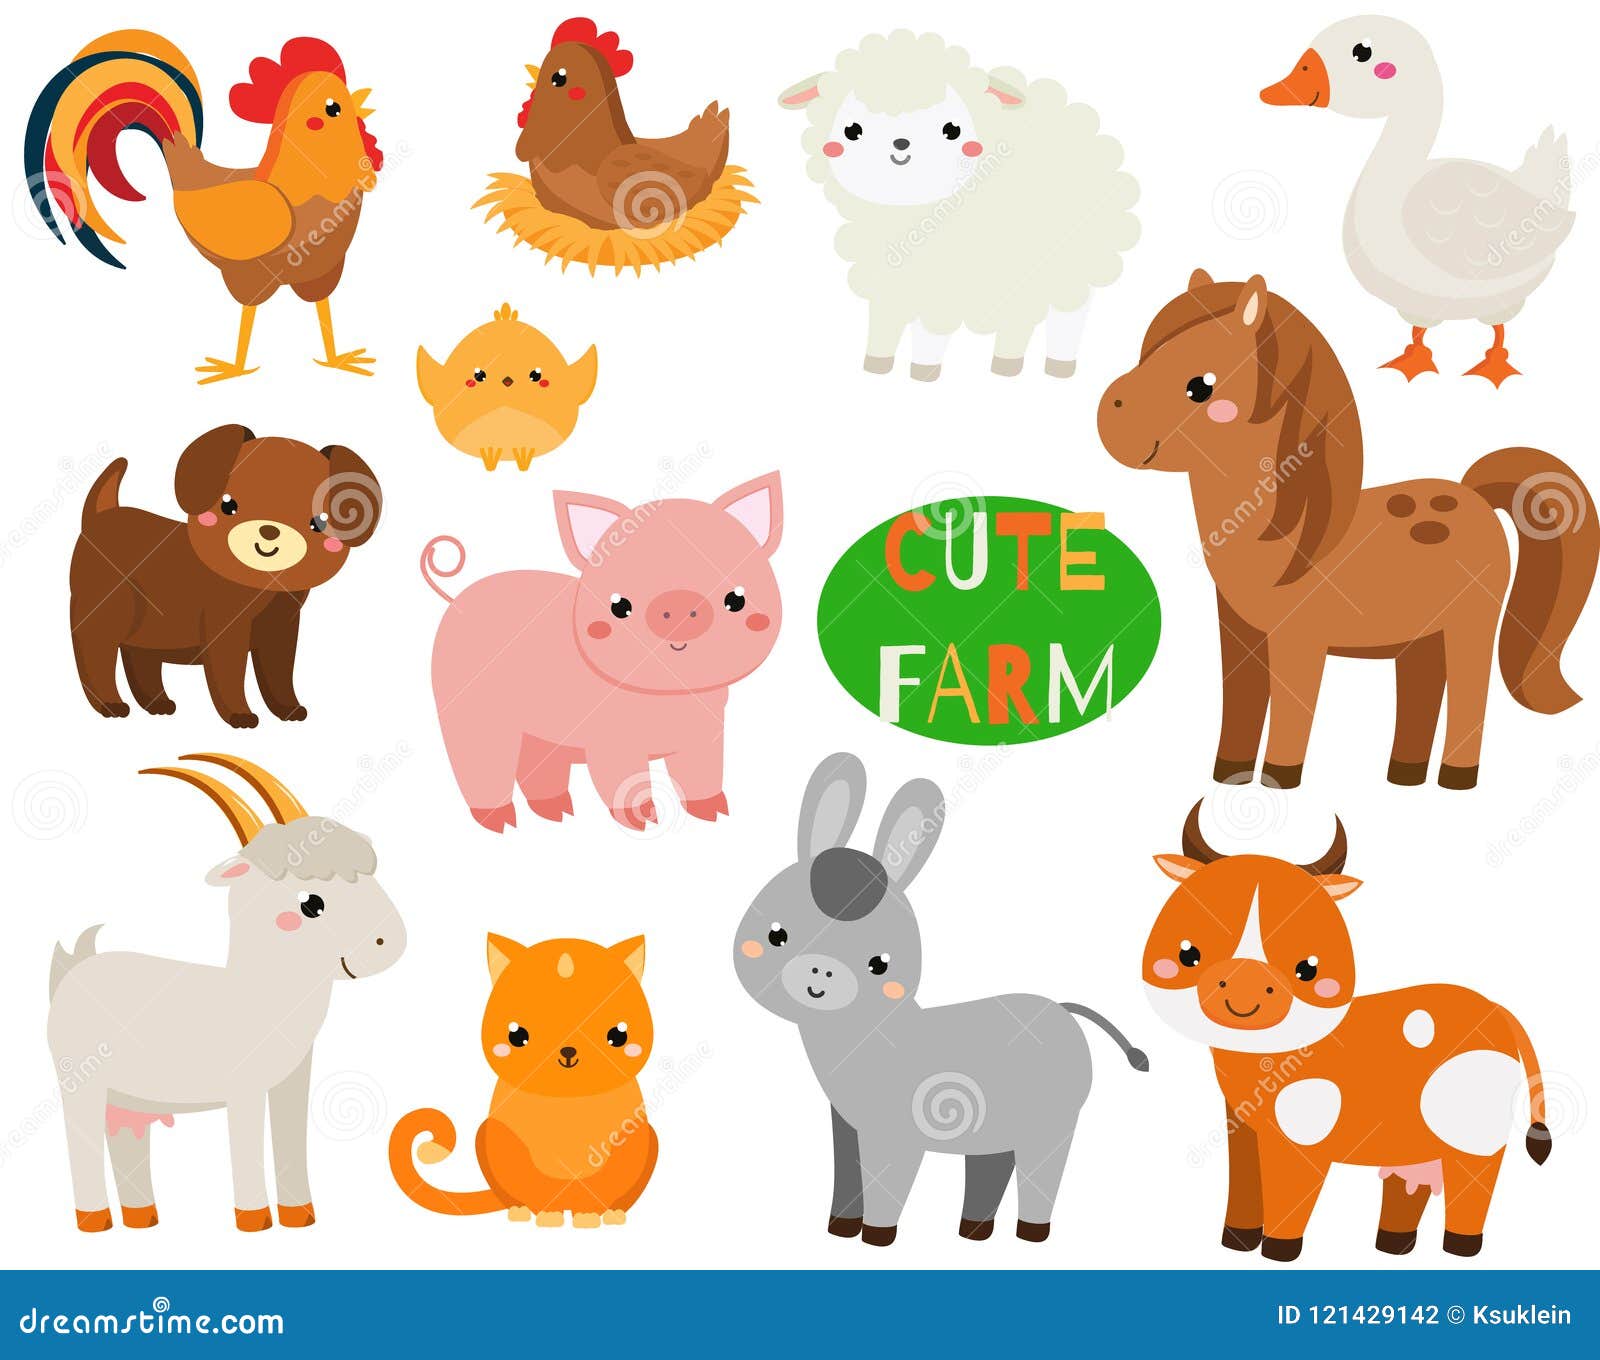 Cute Cartoon Farm Animals Set. Pig, Sheep, Horse and Other Domestic  Creatures for Kids and Children Stock Vector - Illustration of birds,  icons: 121429142